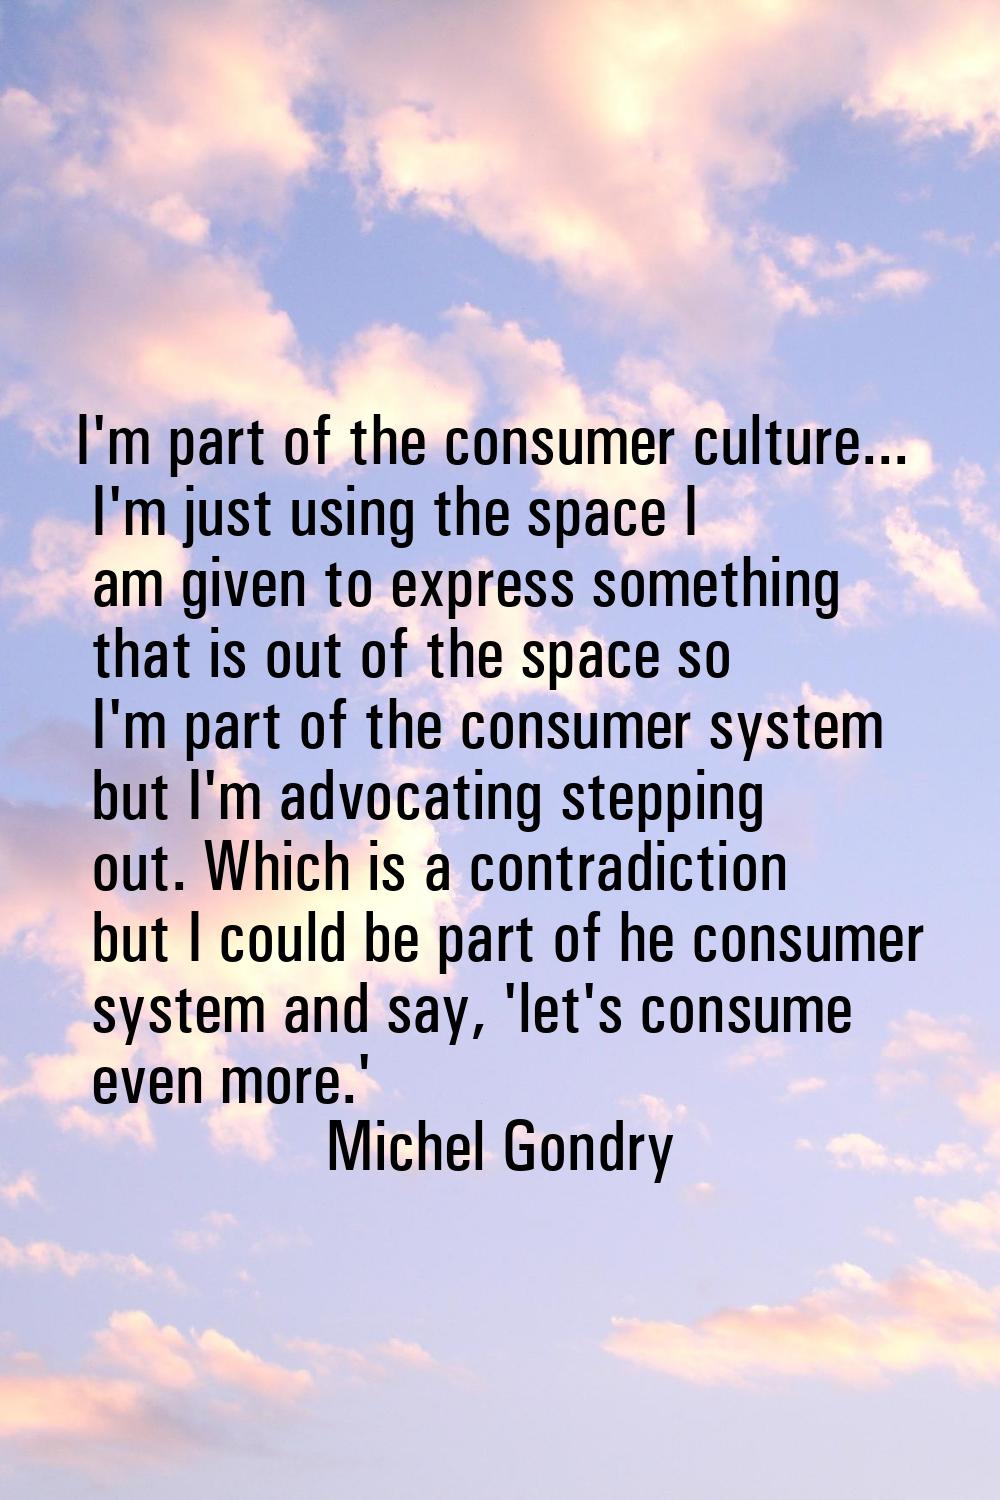 I'm part of the consumer culture... I'm just using the space I am given to express something that i